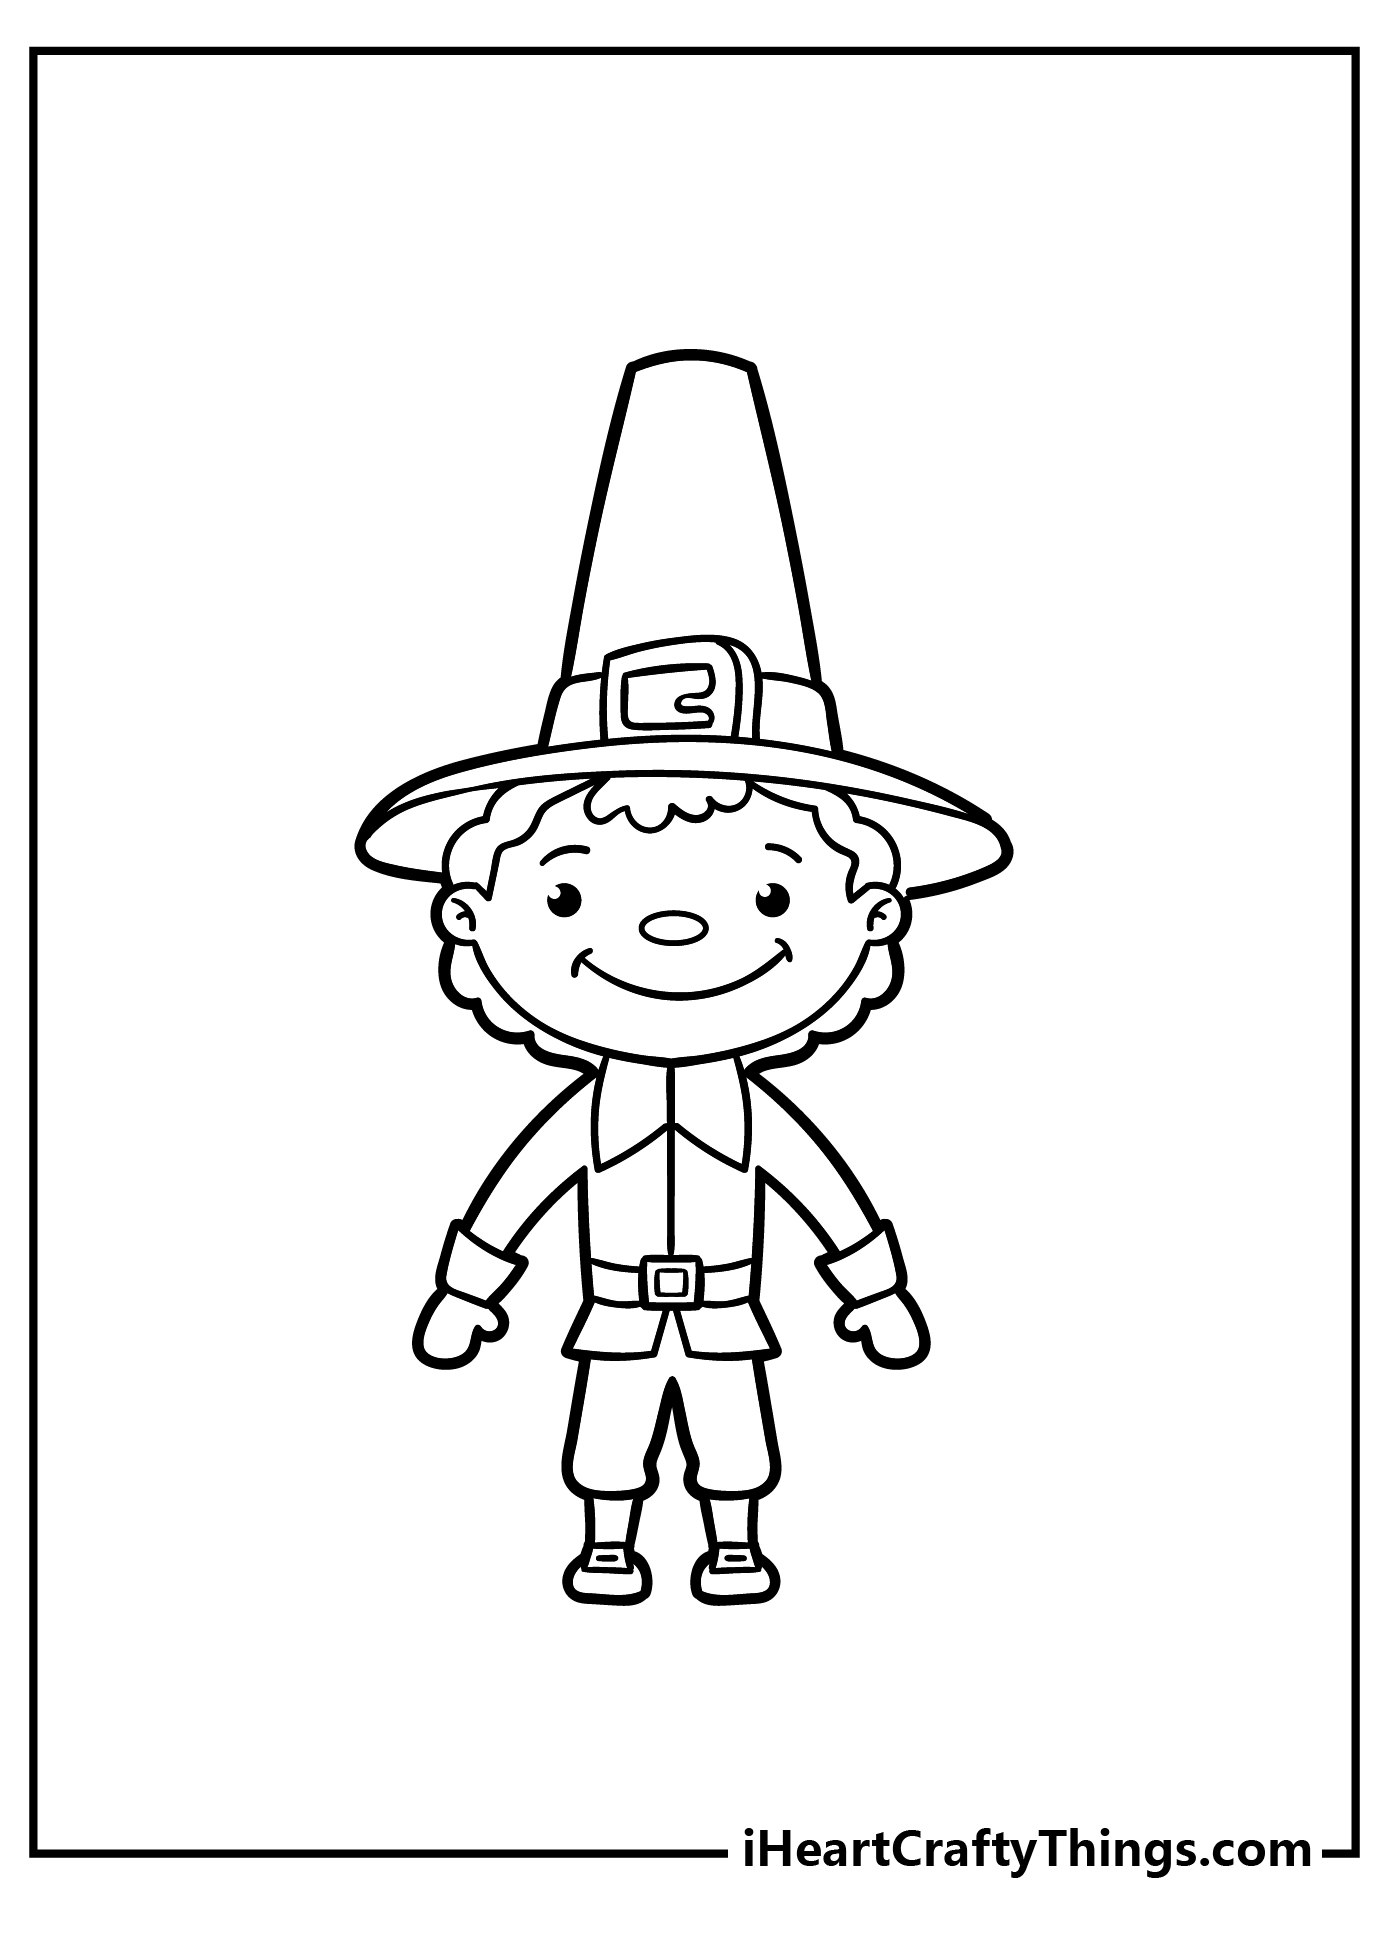 Pilgrim Easy Coloring Pages